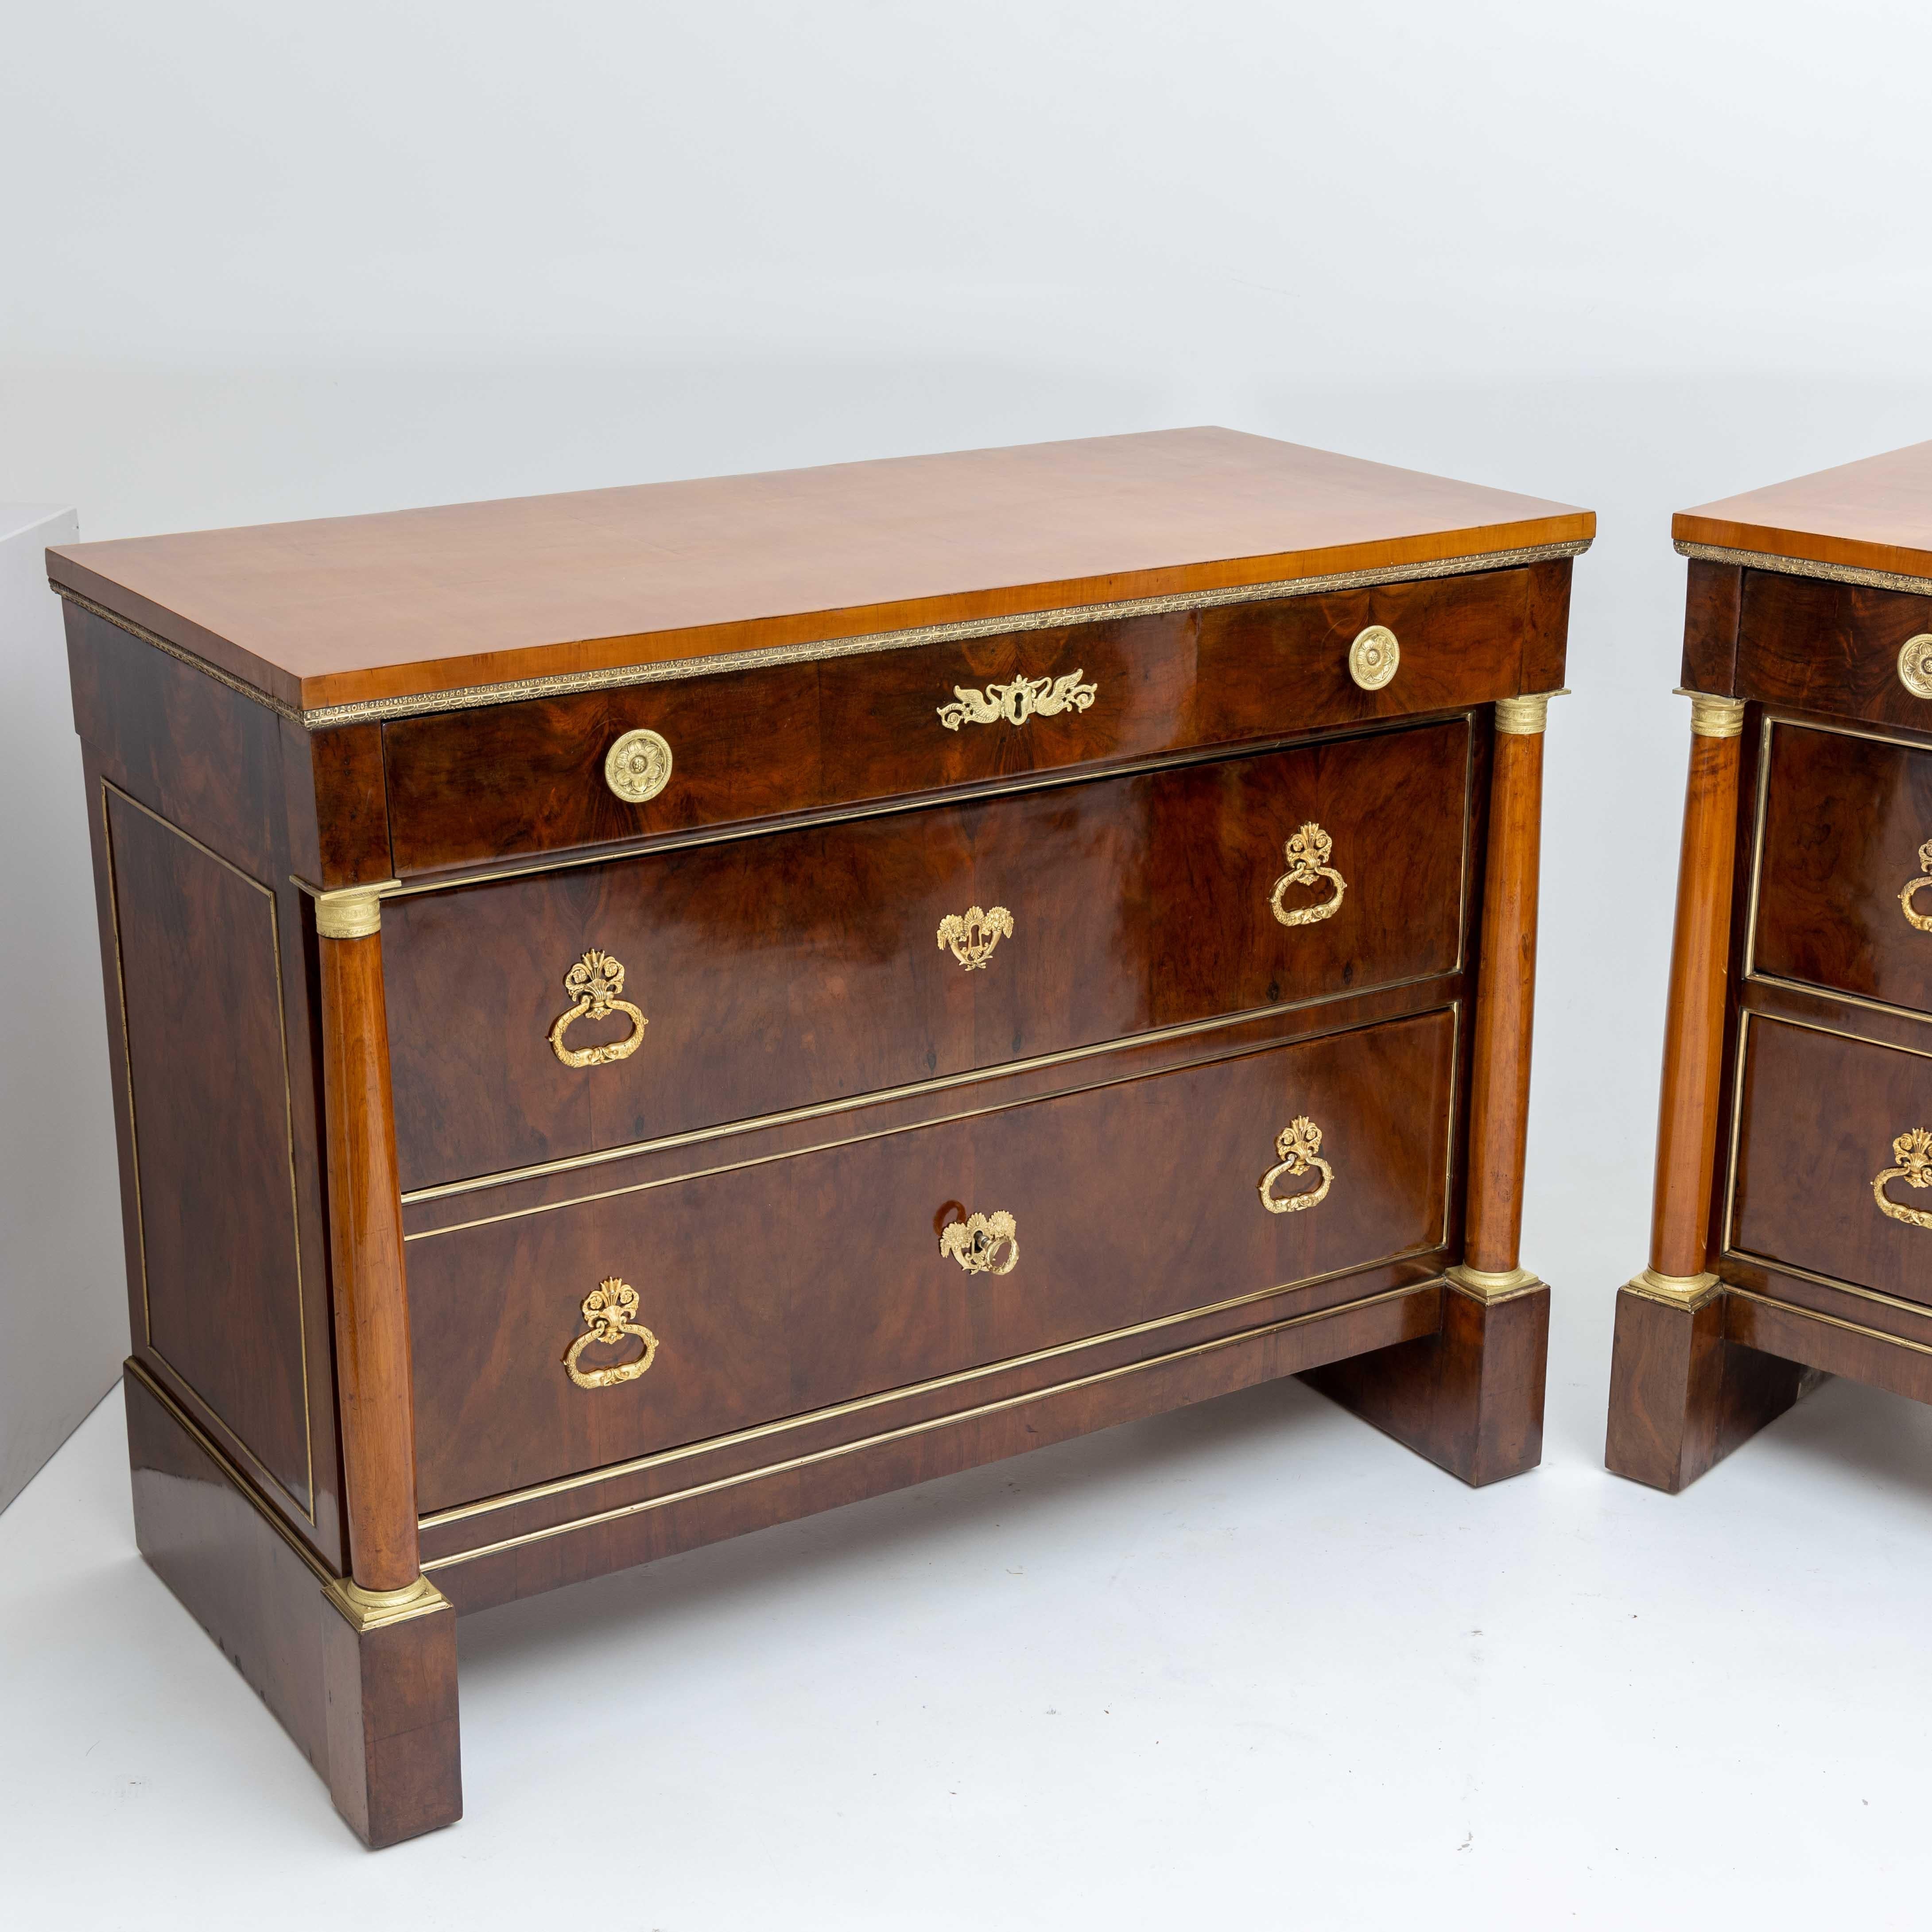 19th Century Pair of Empire Chests of Drawers with Fire-Gilt Fittings, Italy Early 19th Cent.